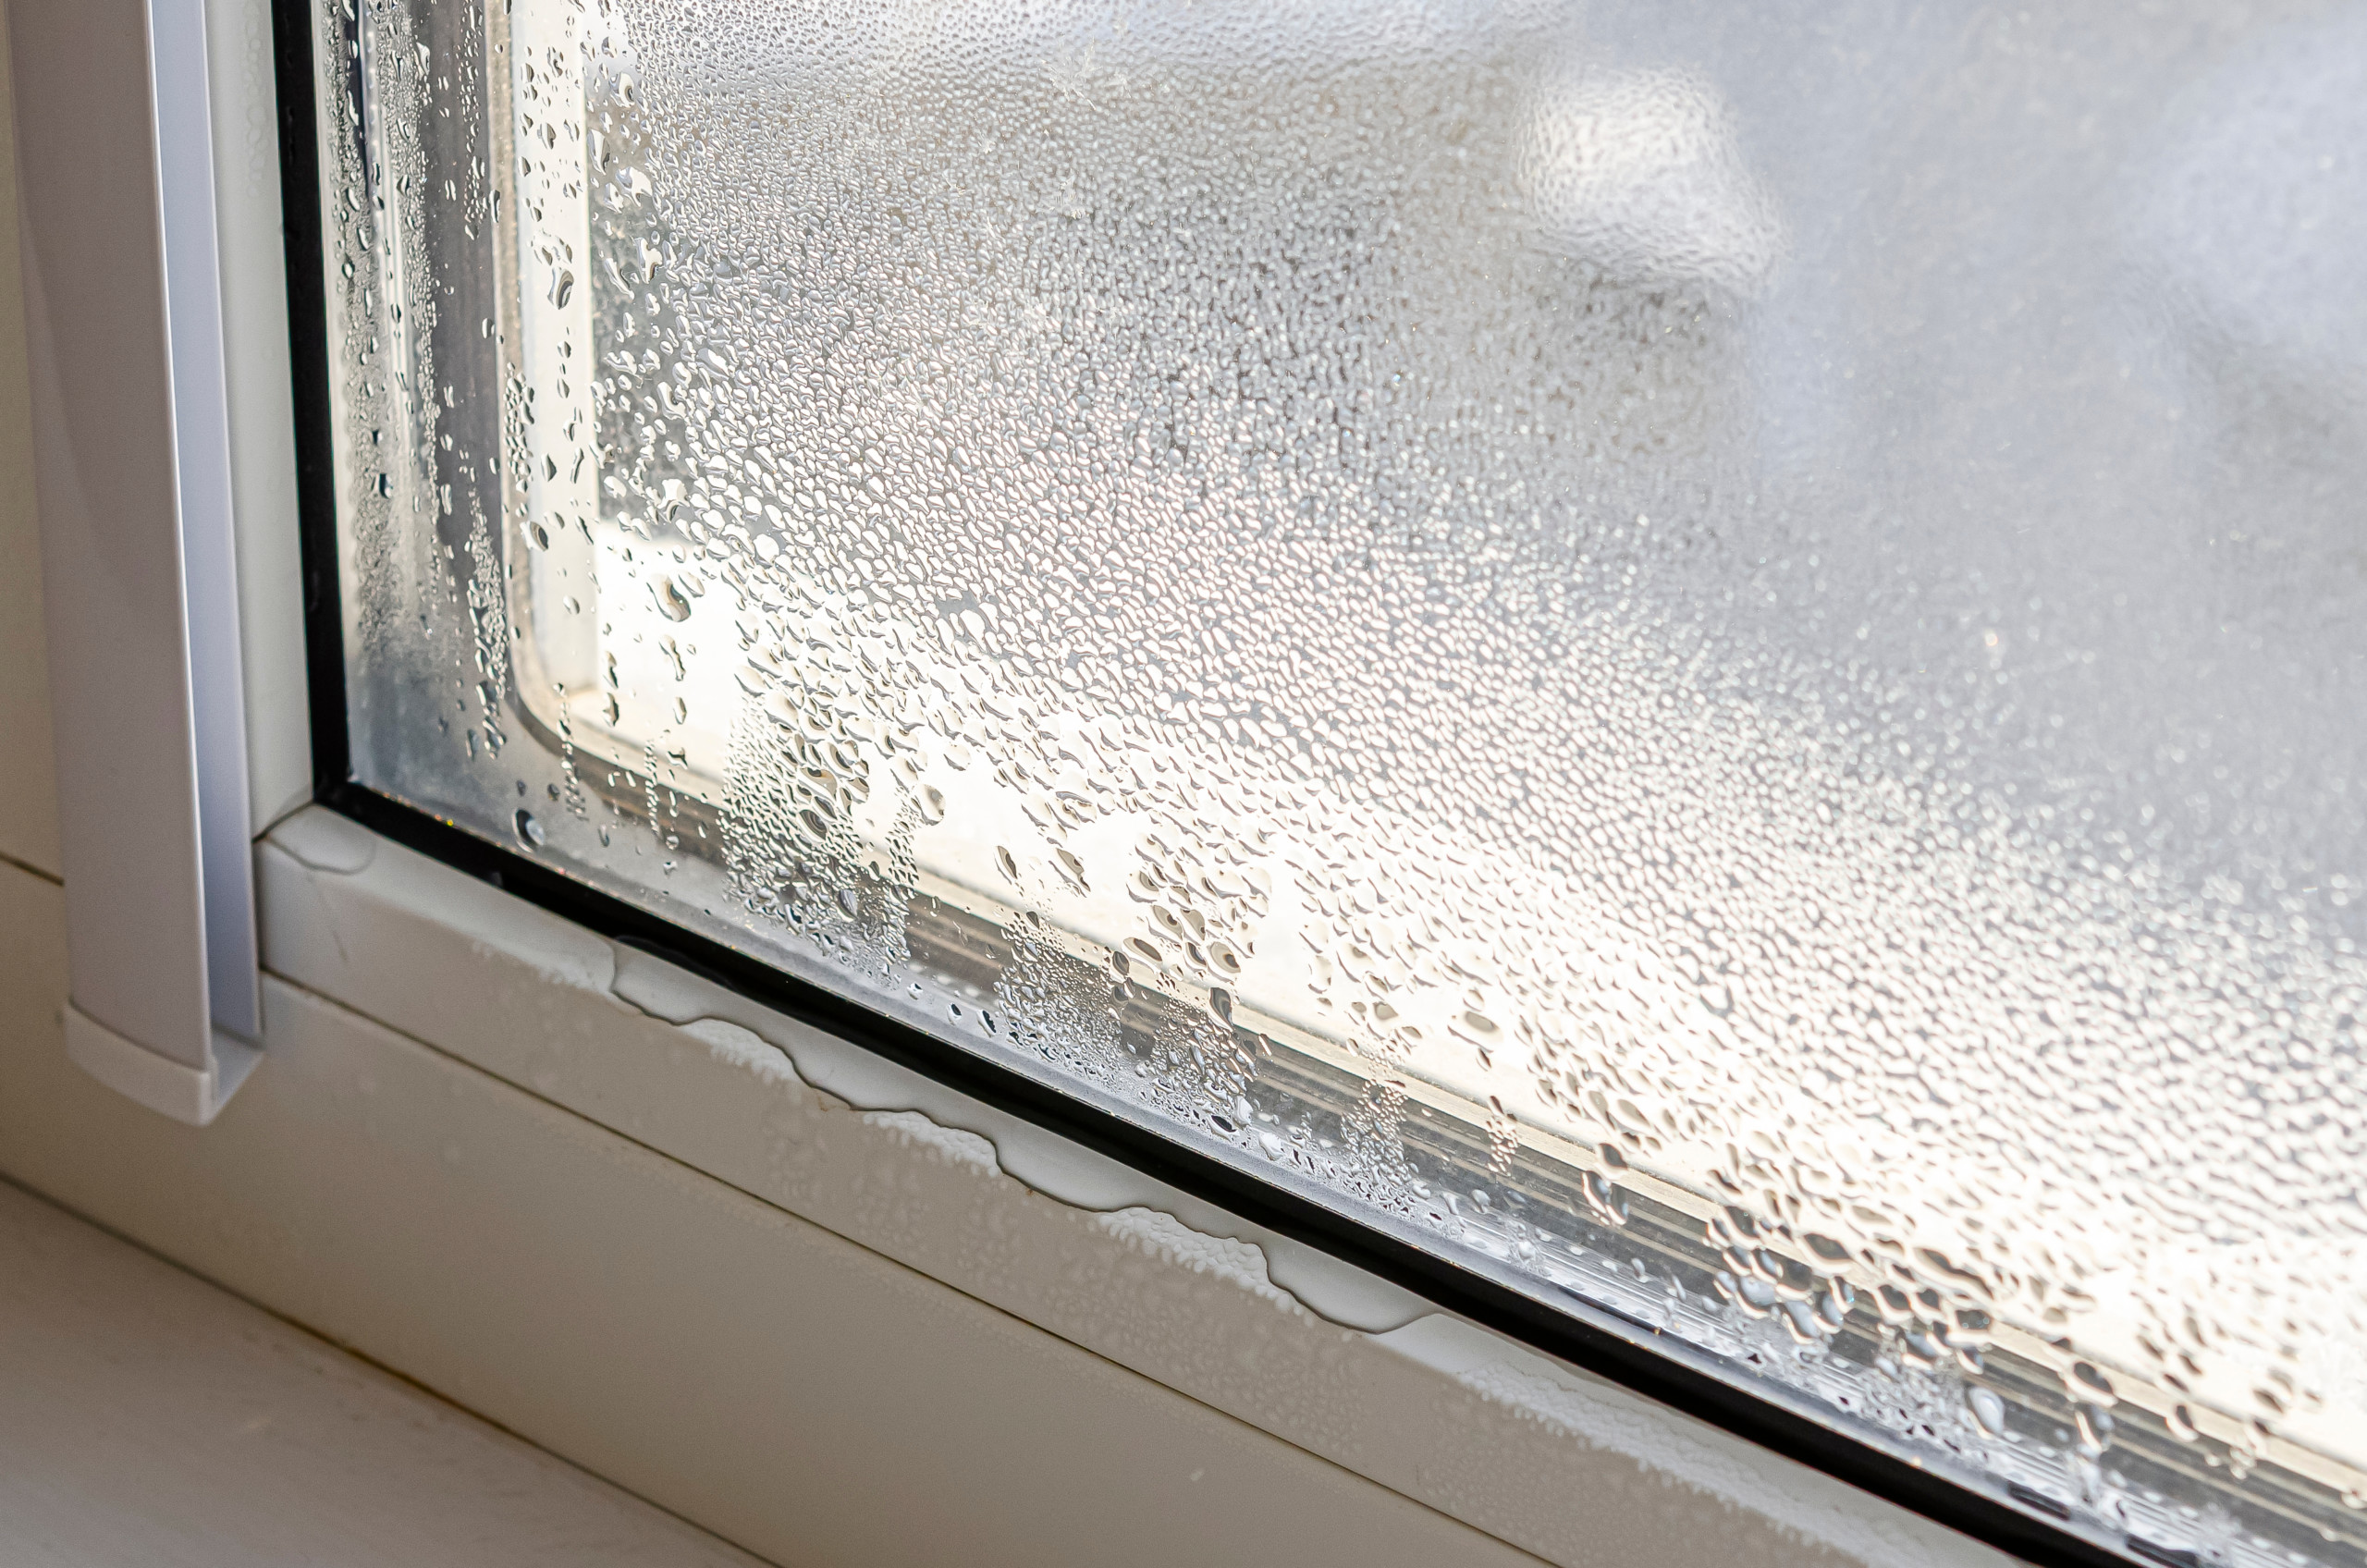 Replacement Windows: Keep Your Home Cool While Lowering Energy Costs